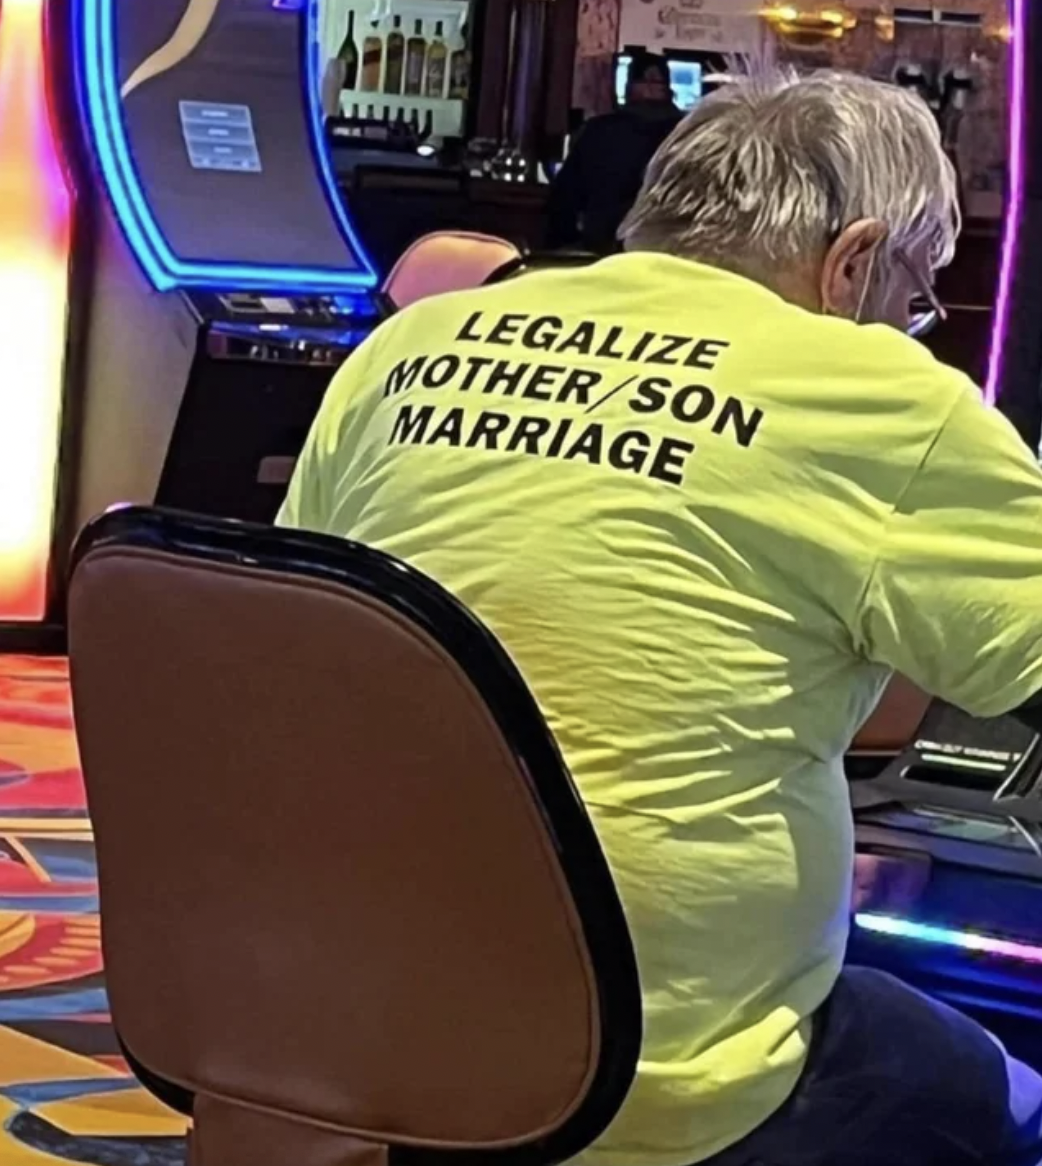 Trashy Fails - indoor games and sports - Bole Legalize MotherSon Marriage